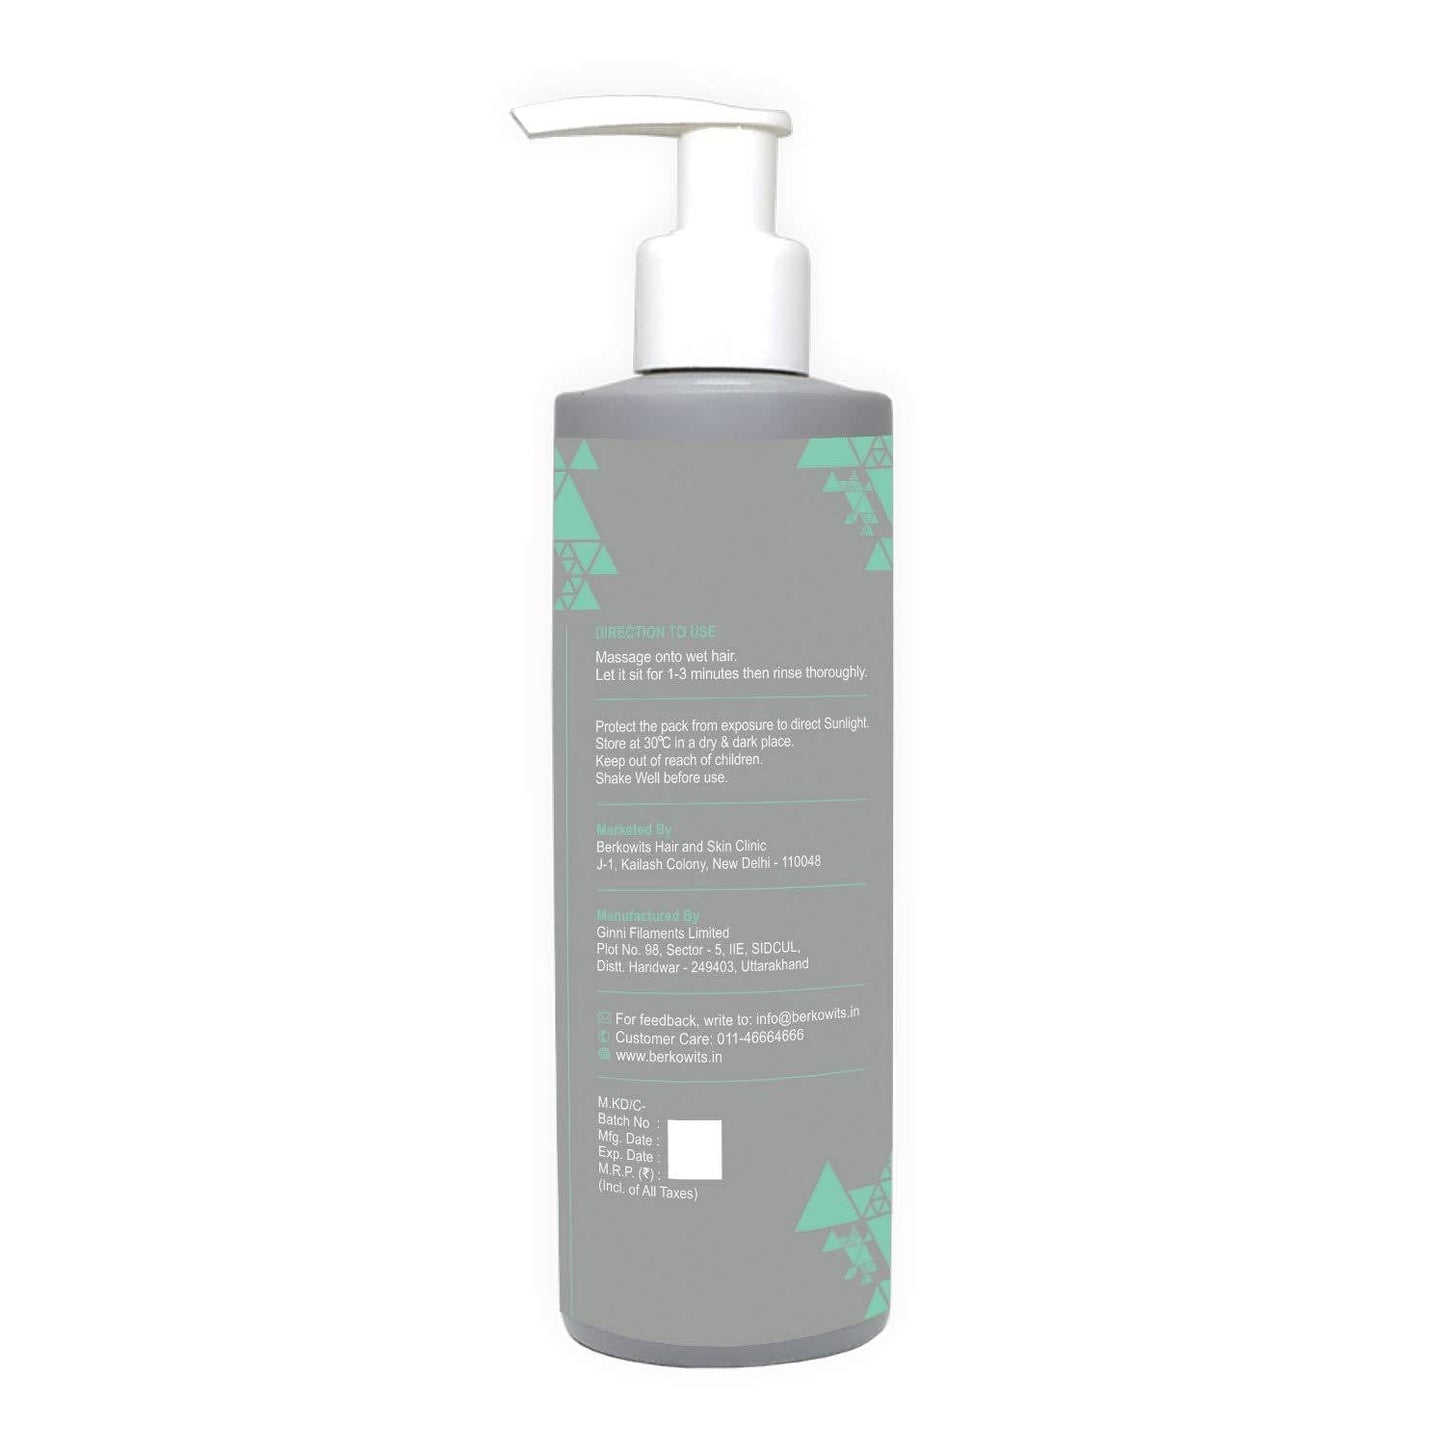 BERKOWITS Nourish Intense Repair Conditioner For Dry, Damaged Hair With Wheat Protein, Shea Butter & Almond Oil, 220 Ml